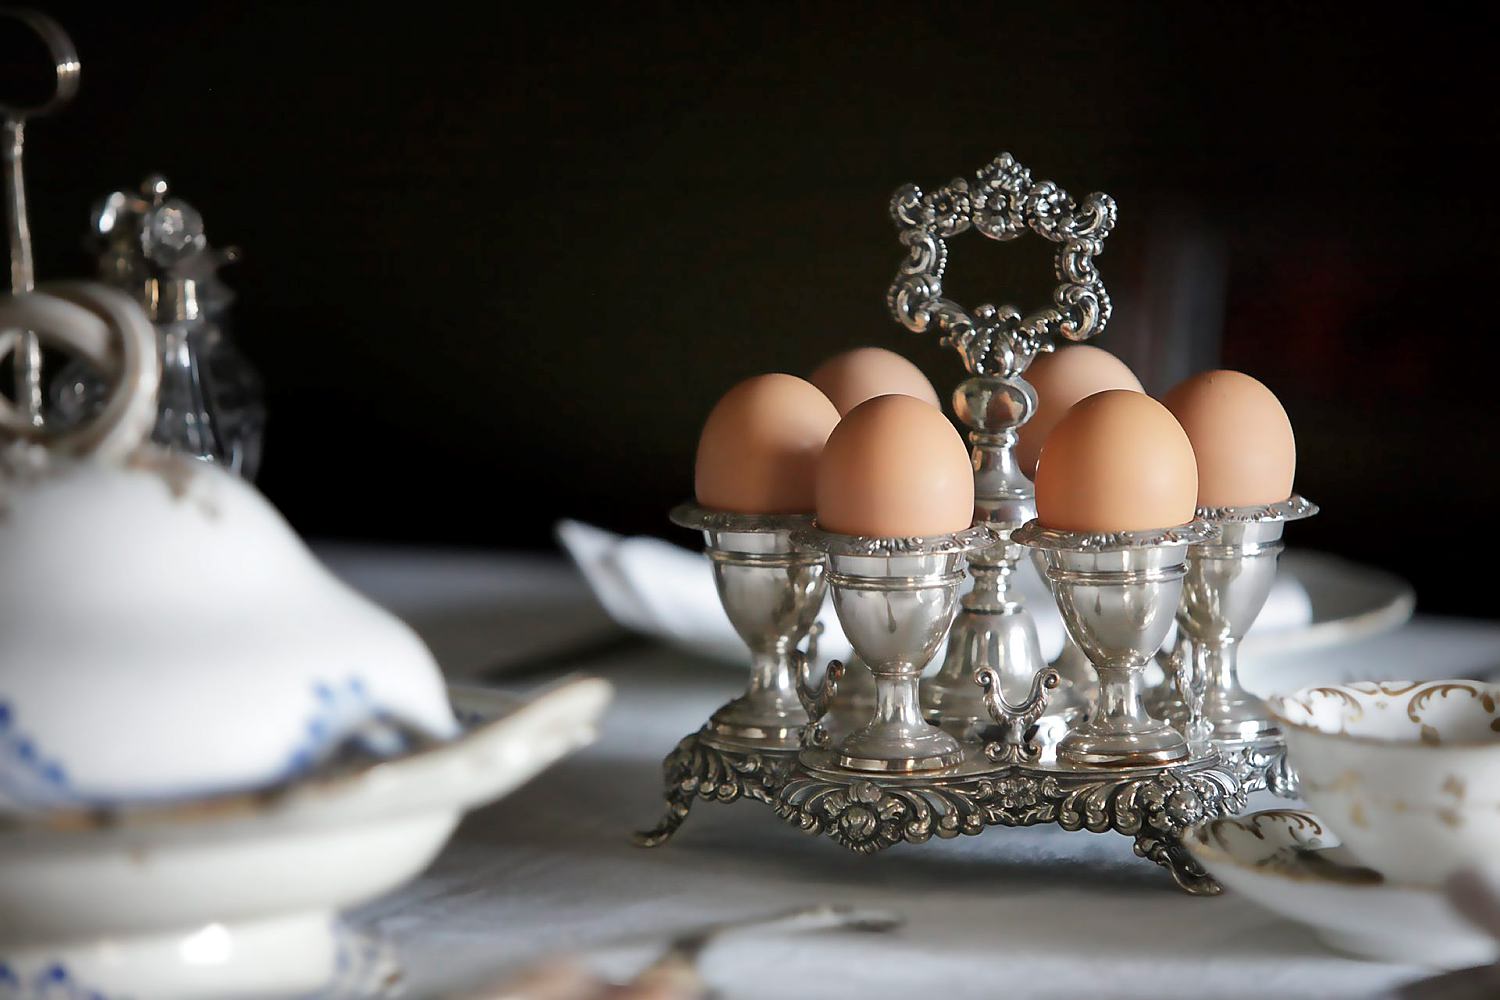 Eggcup trivet as part of a recreated breakfast setting. Photograph (c) Paolo Busato, Historic Houses Trust of NSW